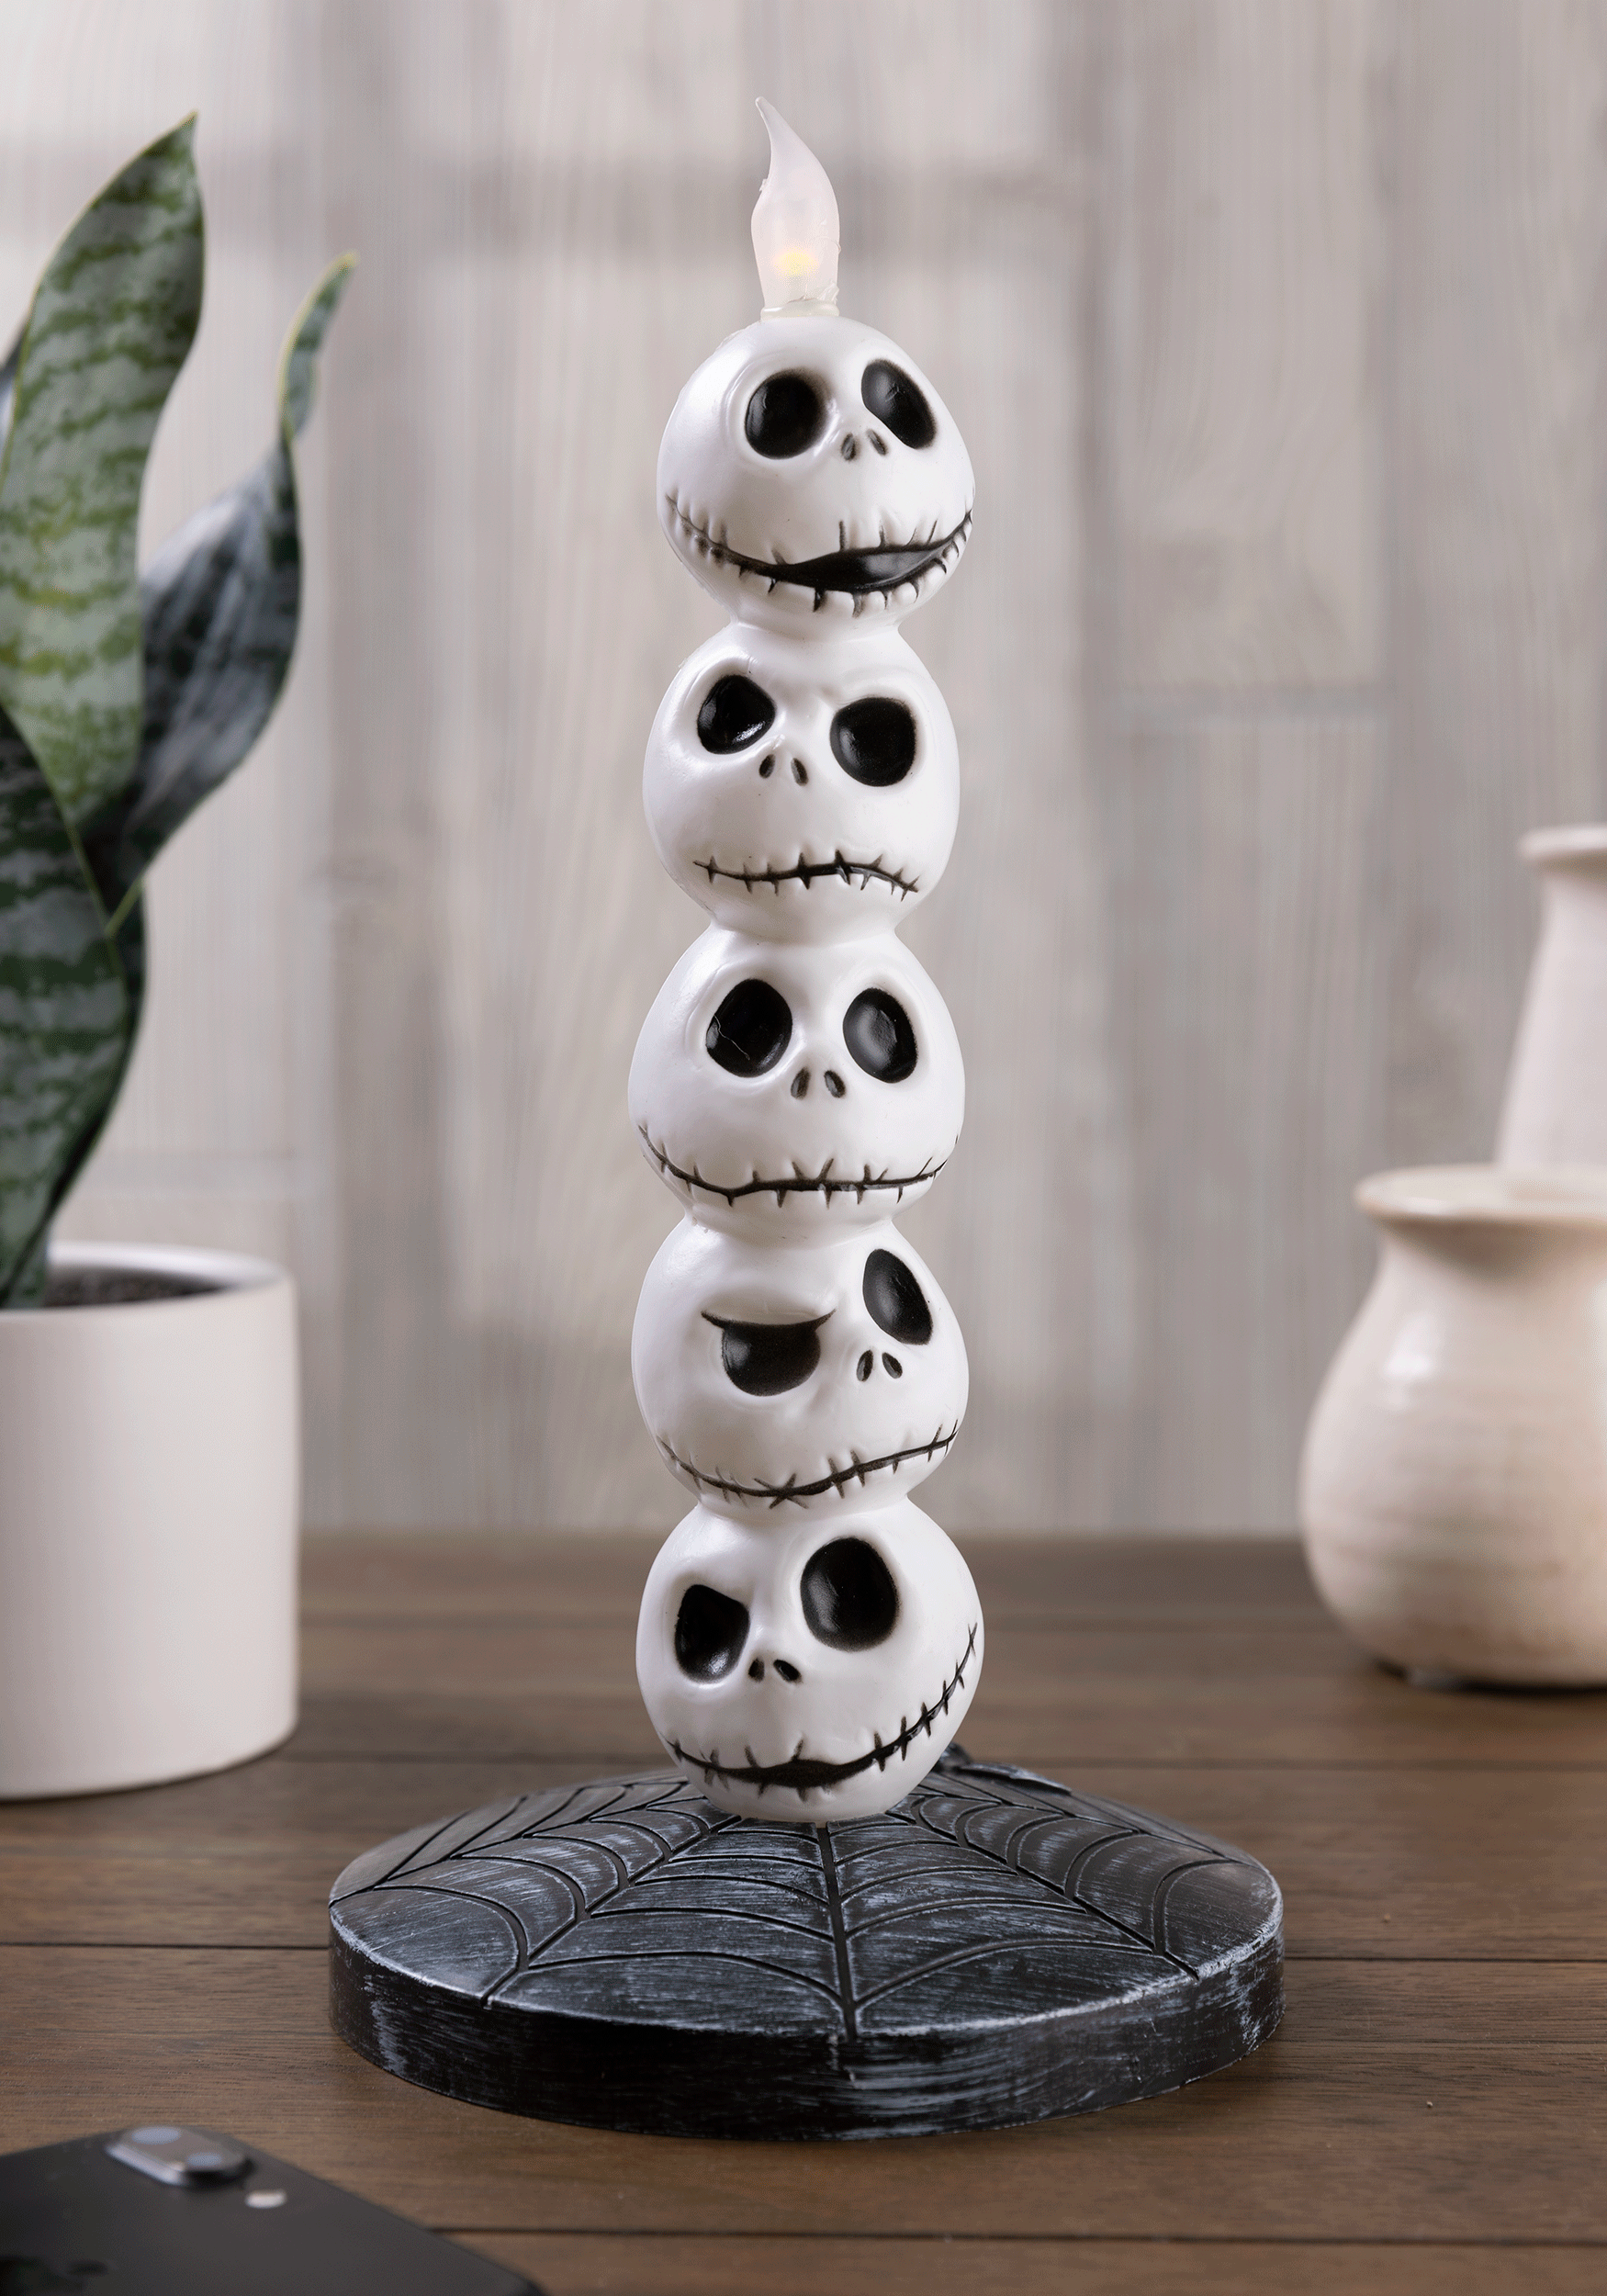 https://images.fun.com/products/76456/1-1/nightmare-before-christmas-jack-skellington-light-up-candle.gif